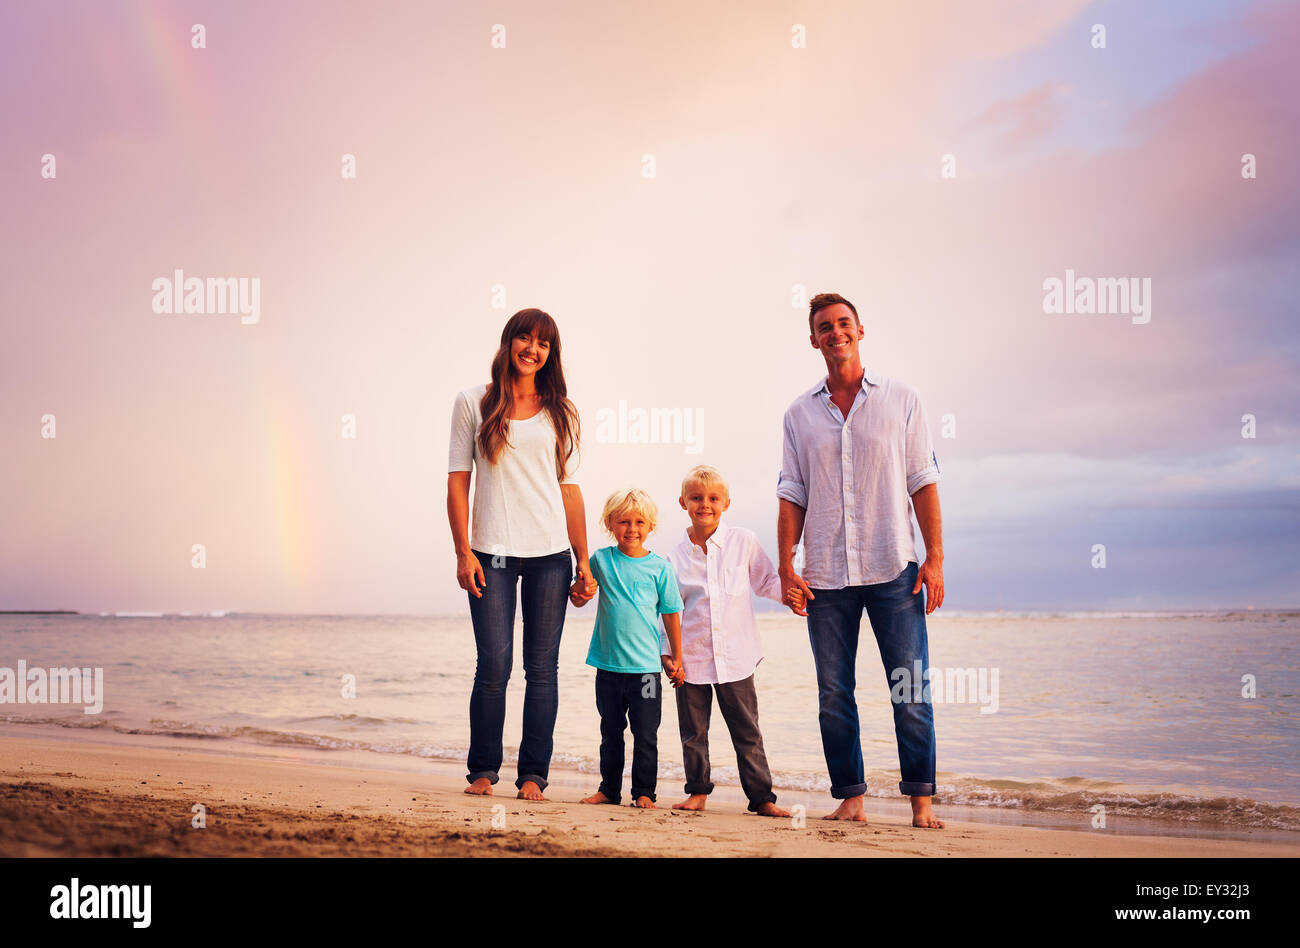 Happy young family on the beach at sunset with amazing rainbow Stock Photo